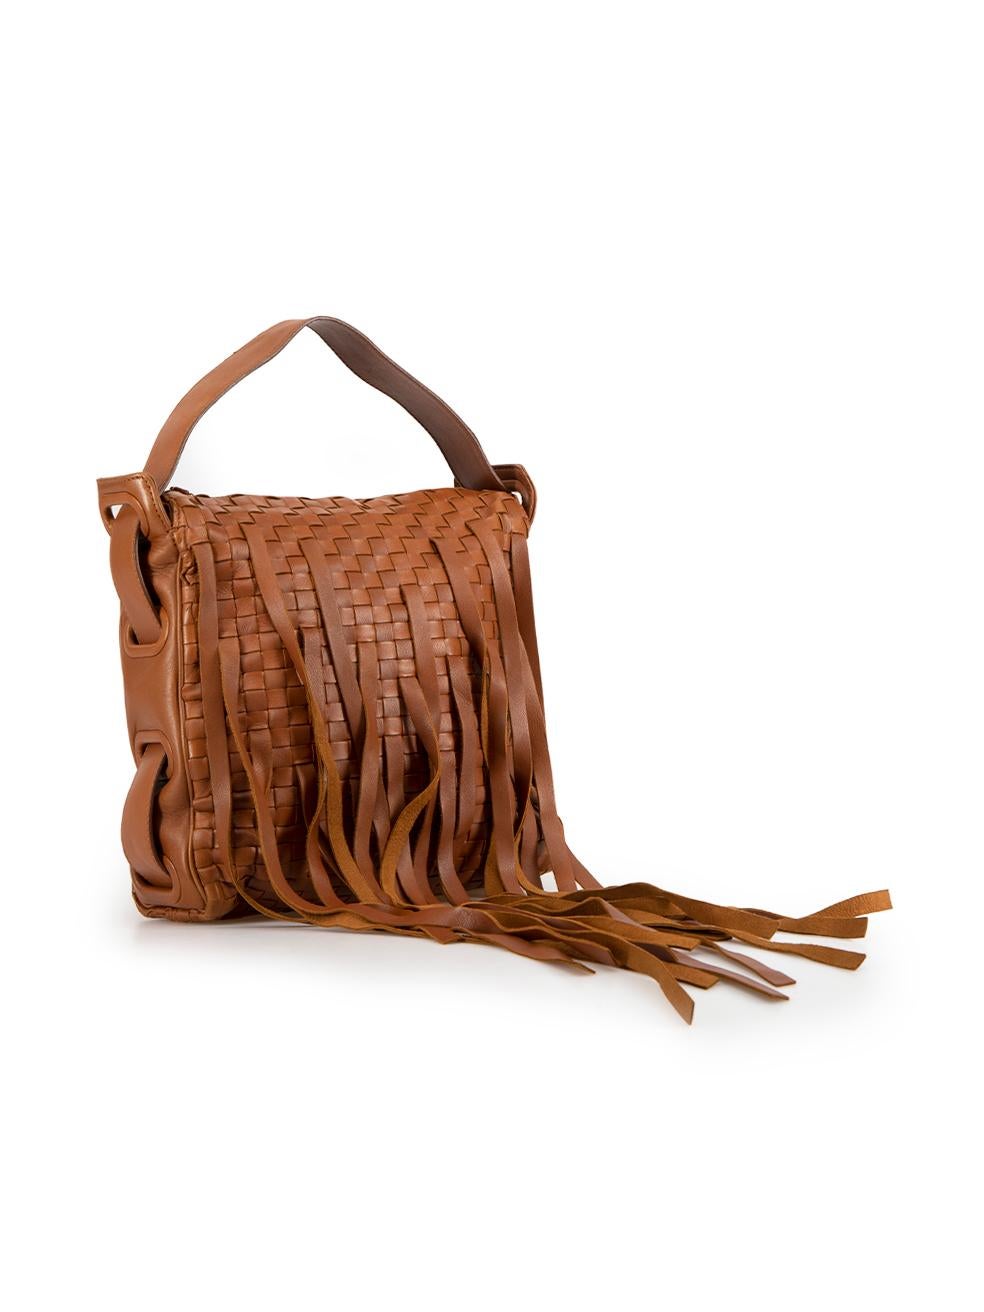 CONDITION is Very good. Minimal wear to bag is evident. Minimal wear to the lining and top handle with discoloured marks and small scuff at the front-right corner and a stained fringe tassel on this used Bottega Veneta designer resale item.